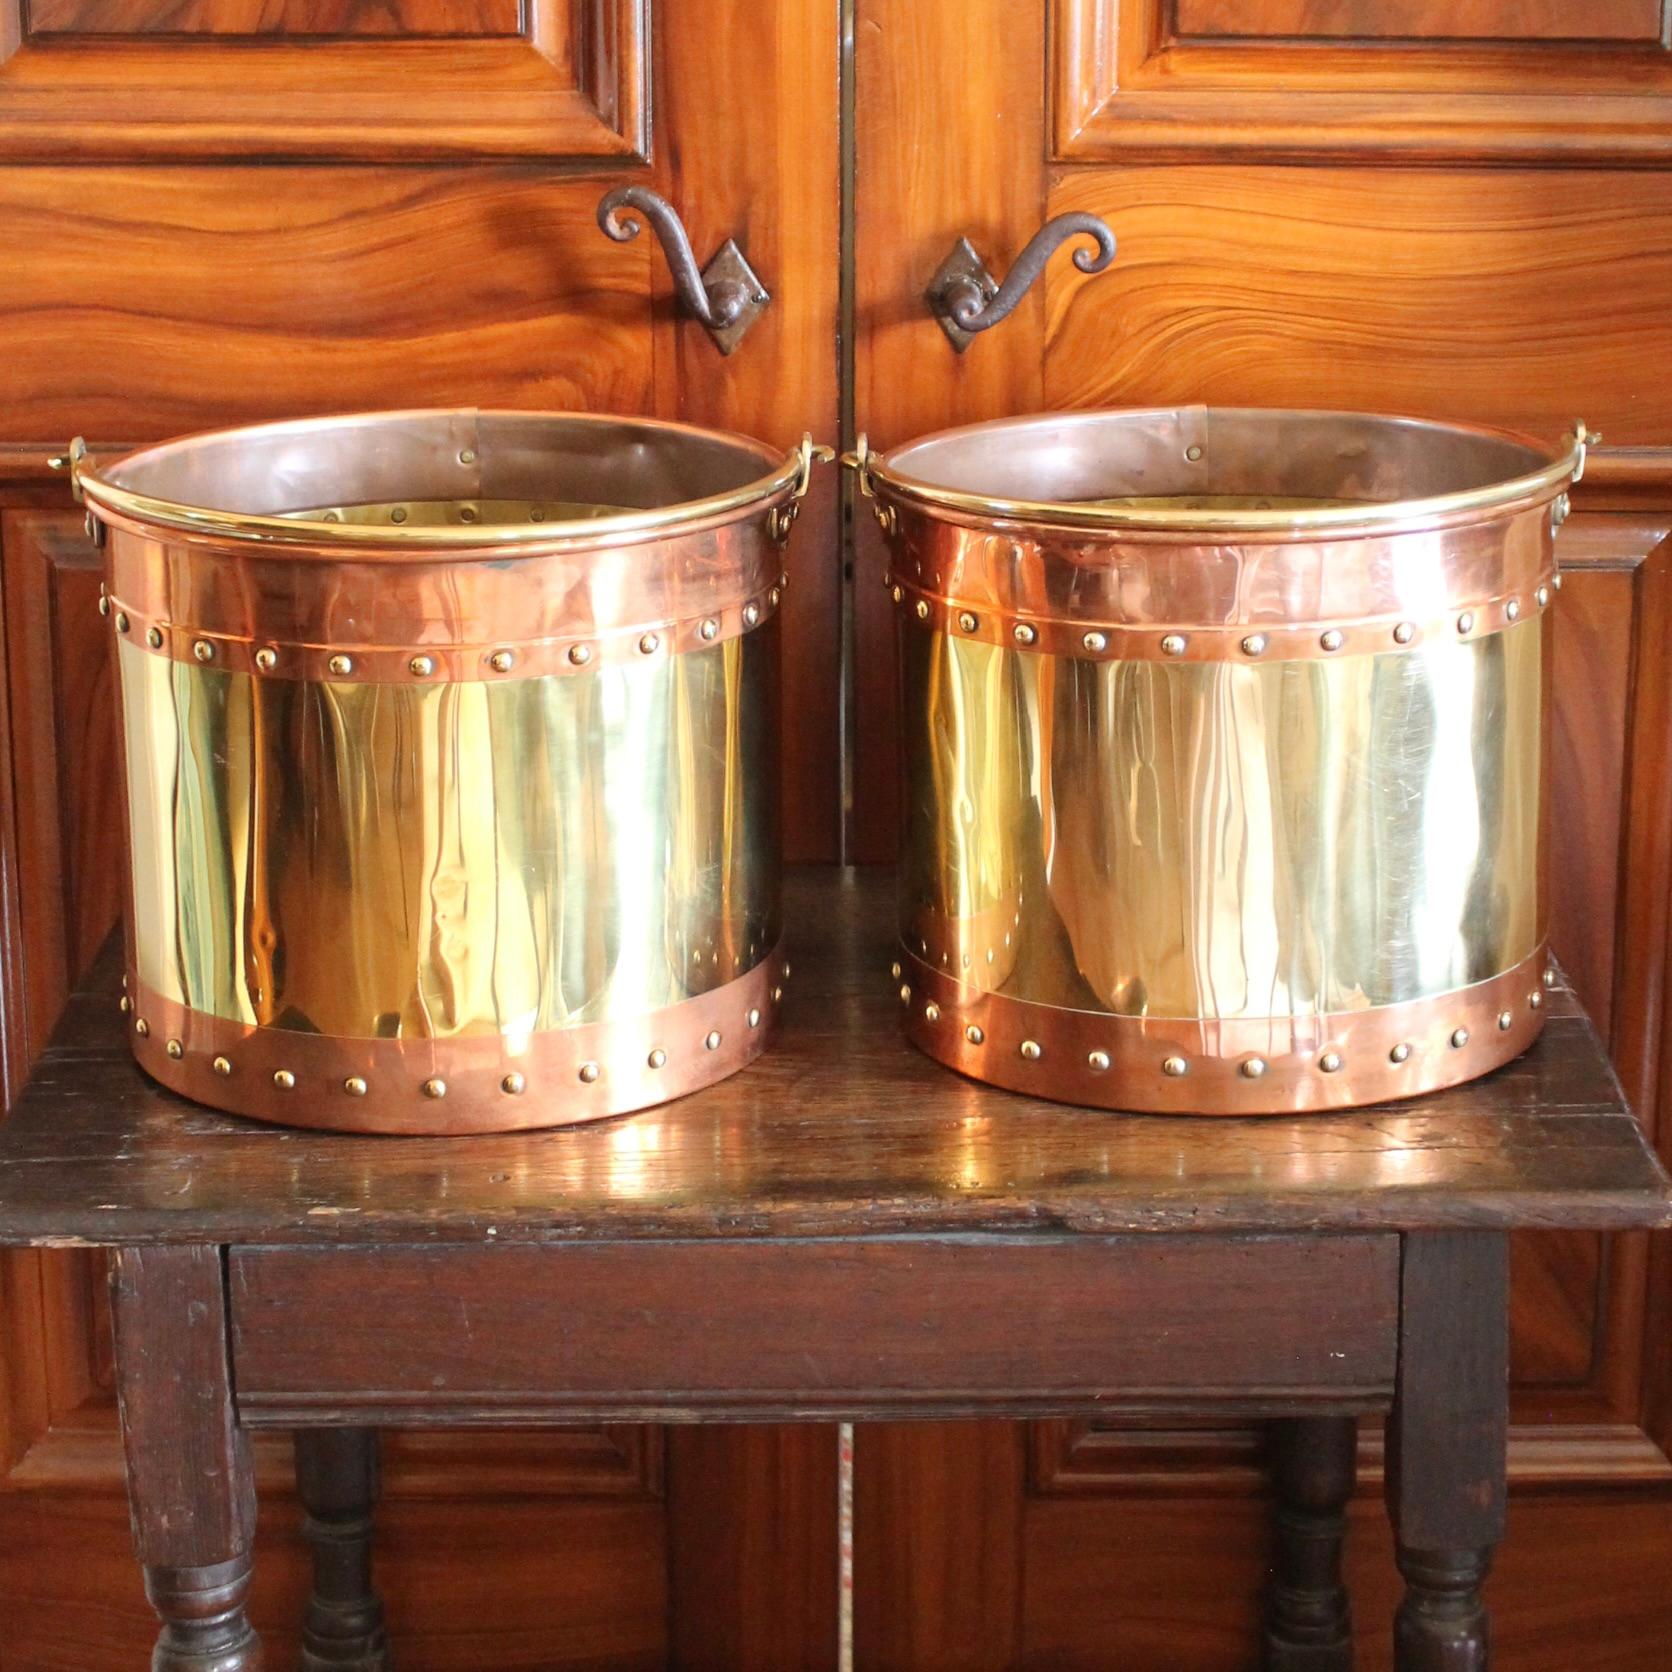 A pair of substantial brass fireplace buckets banded top and bottom with copper, and attractively studded with brass rivets along the seams. A great English look, suitable for holding kindling, for a fancy wastebasket or for decorative use.